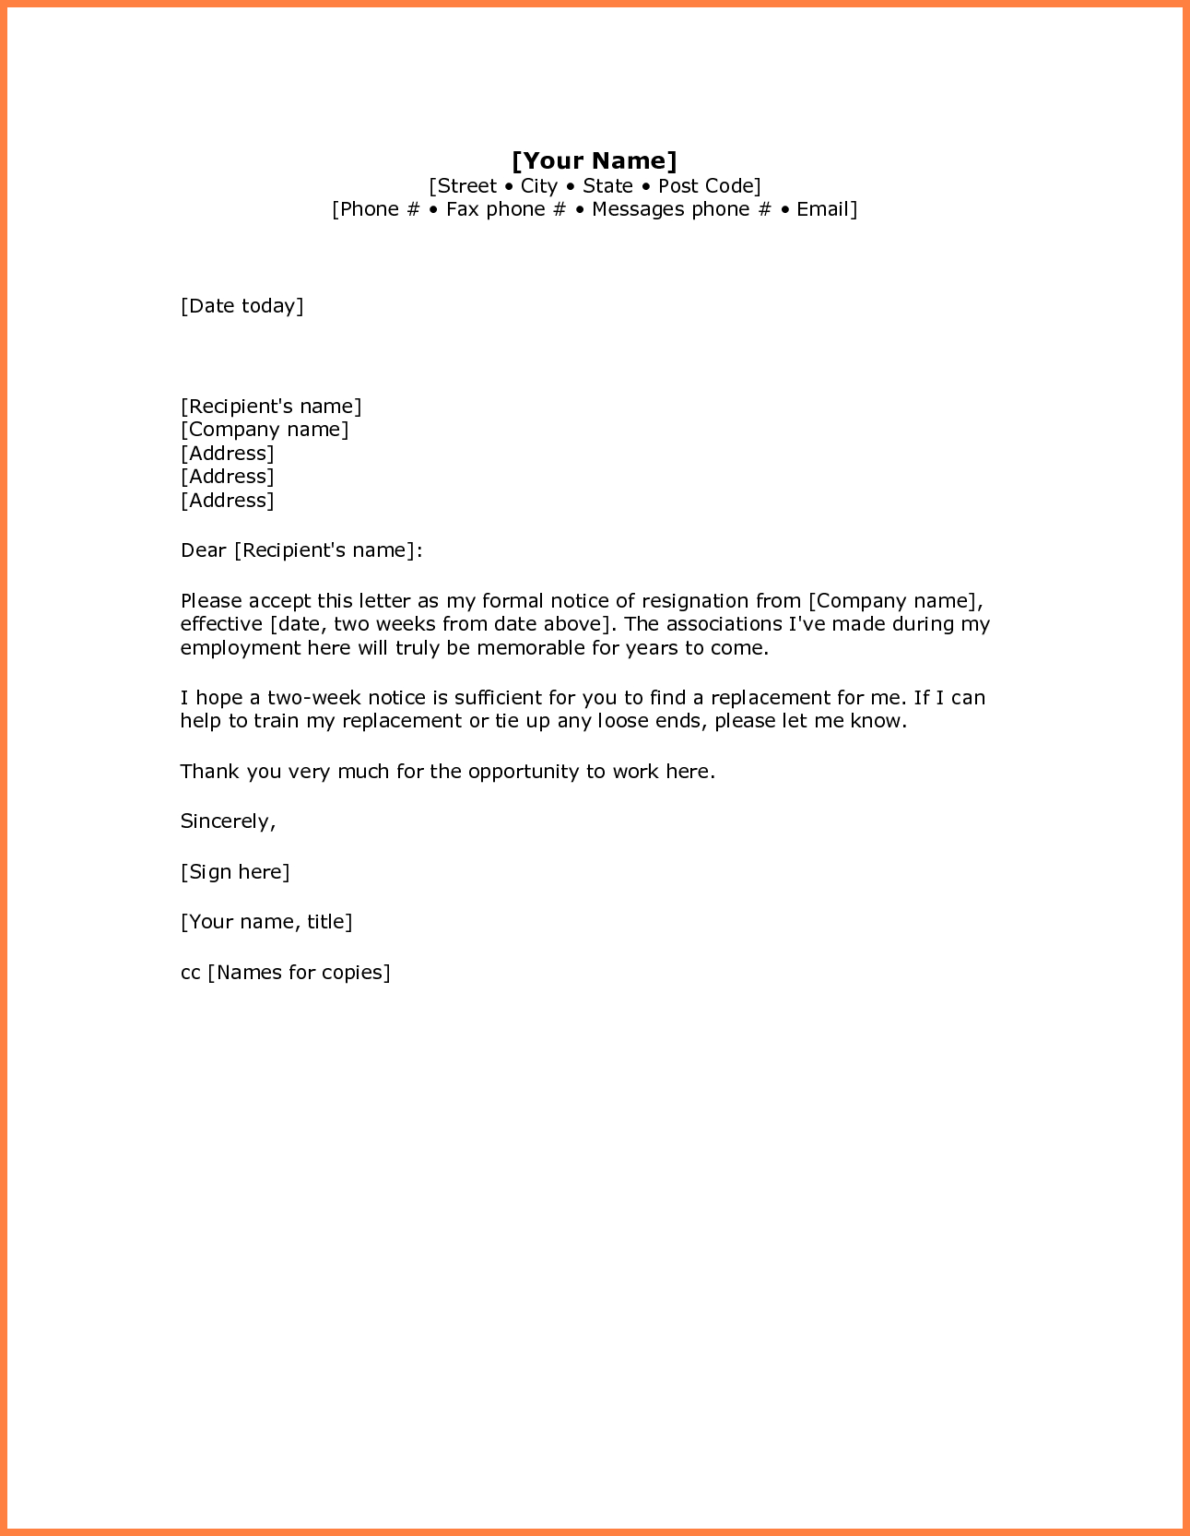 simple-resignation-letter-example-23-simple-resignation-intended-for